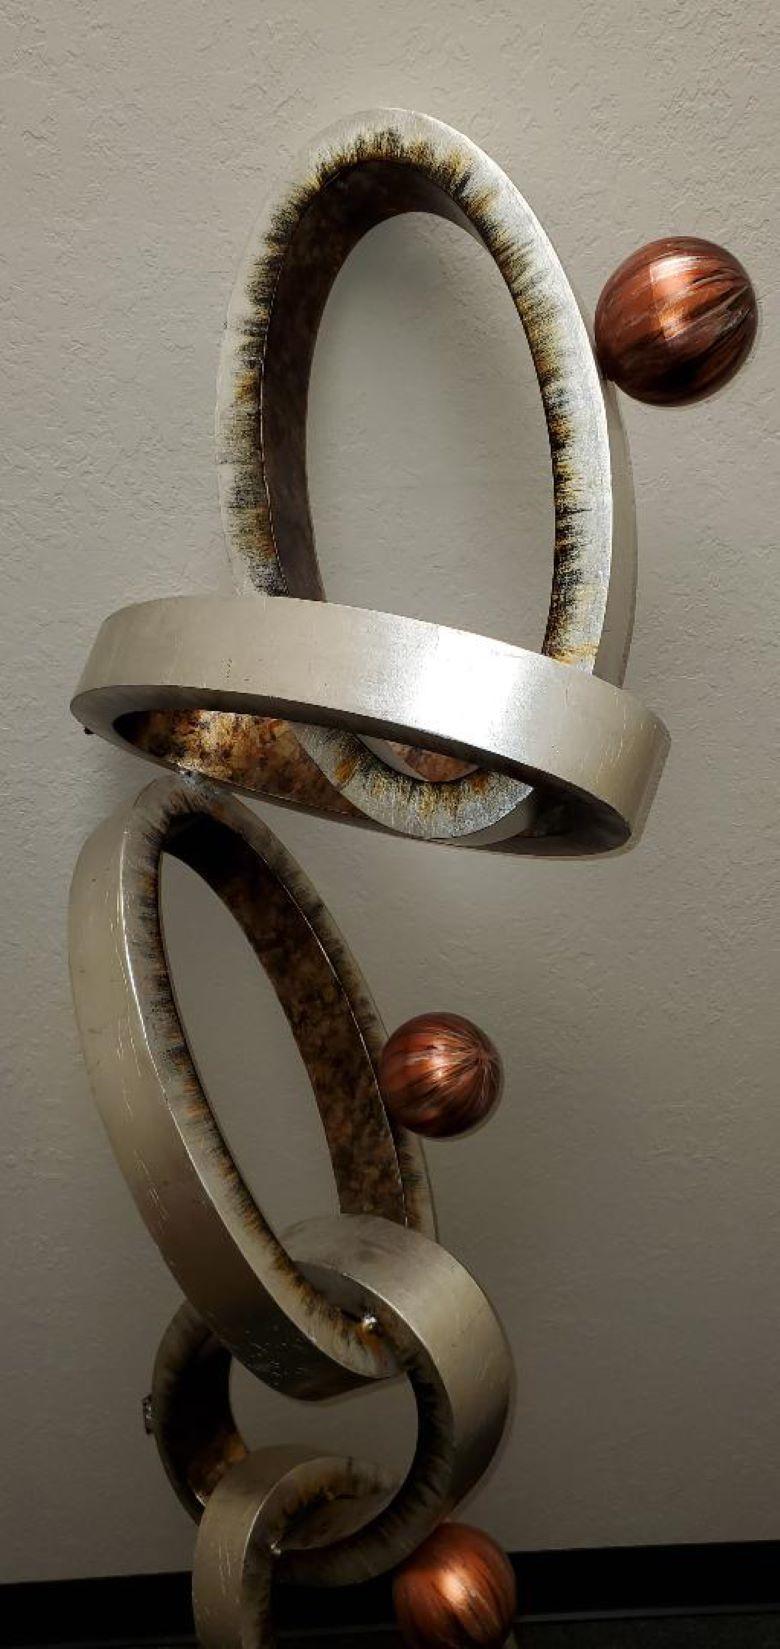 American Abstract Modern Wall Art Sculpture of Interlocking Metal Ovals & Spheres For Sale